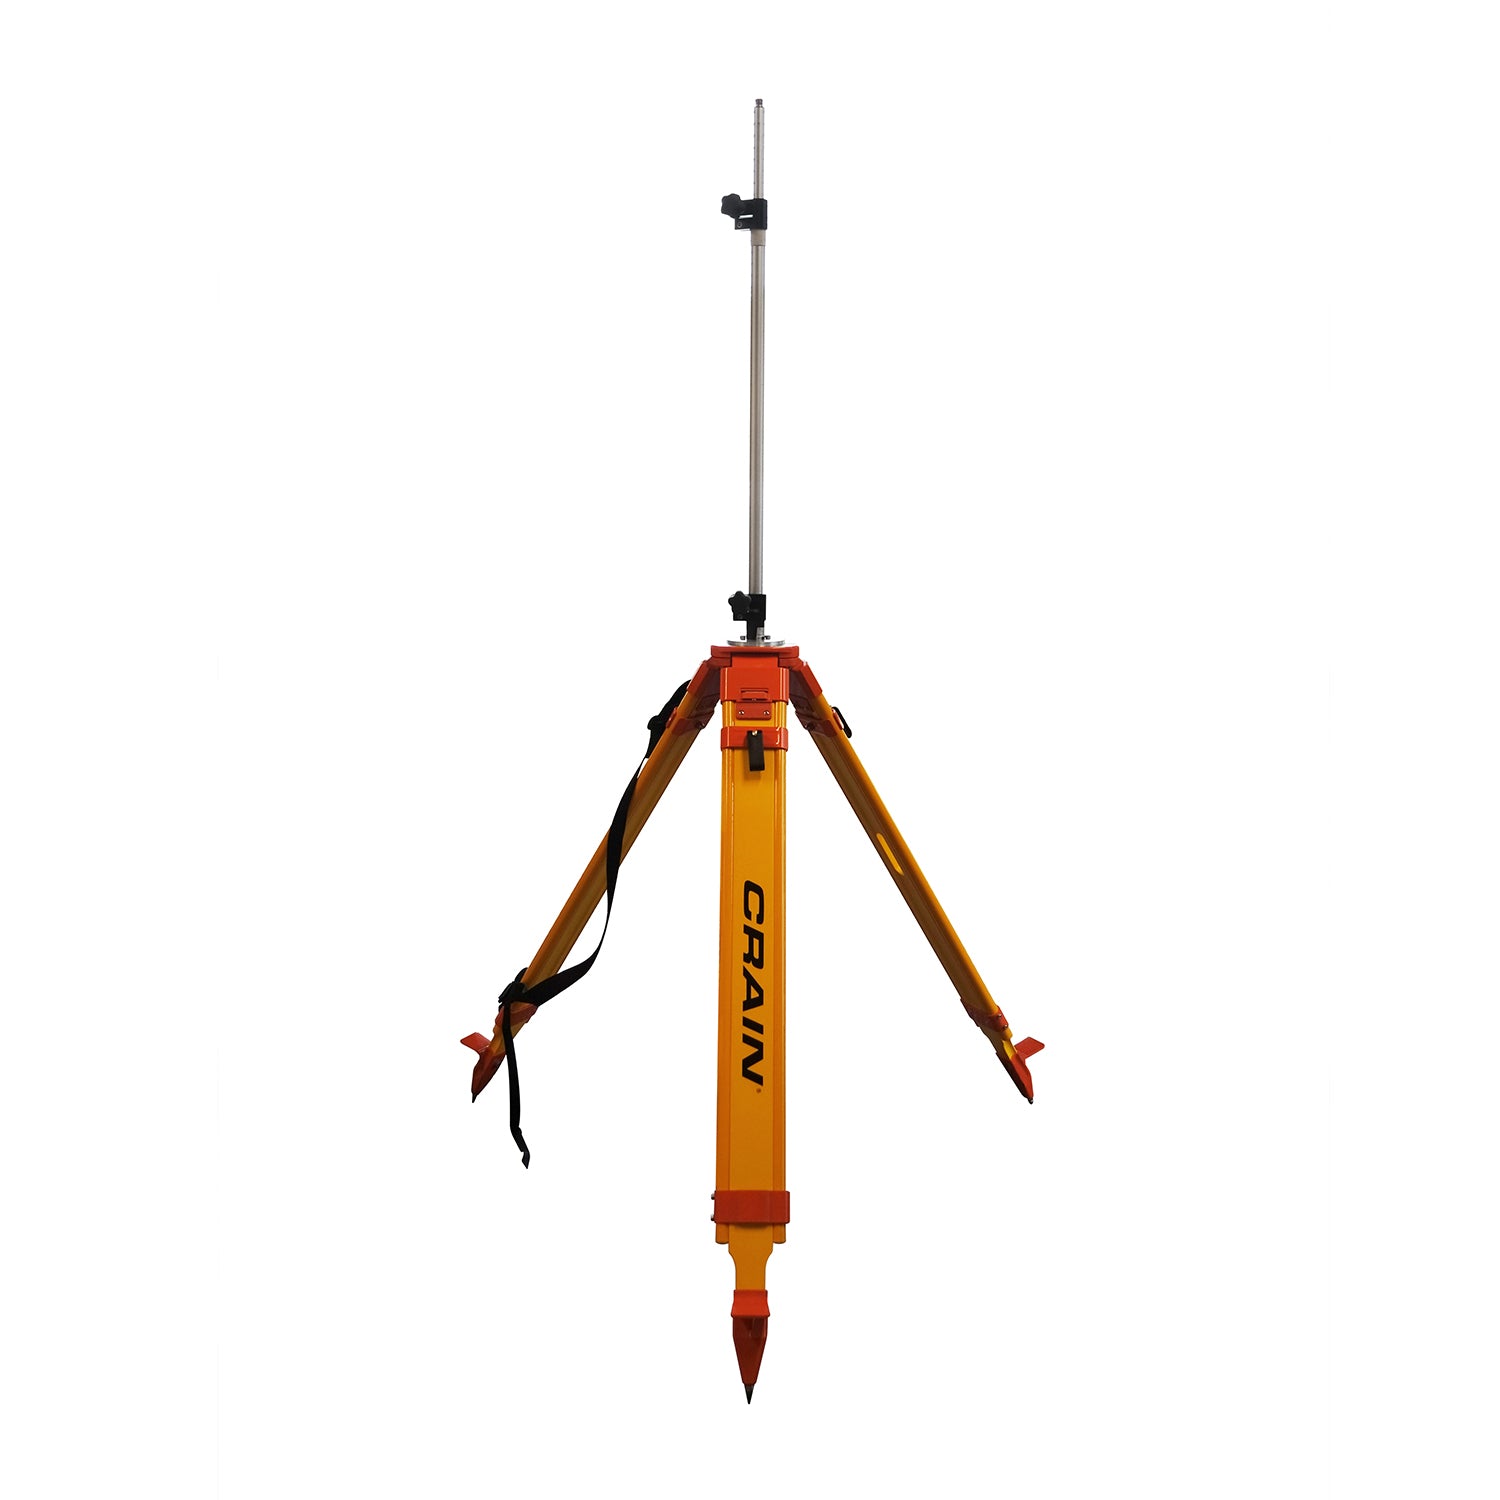 Crain Heavy Duty Quick Clamp Tripod with Radio Antenna Mast Assembly -Tripods & Accessories- eGPS Solutions Inc.